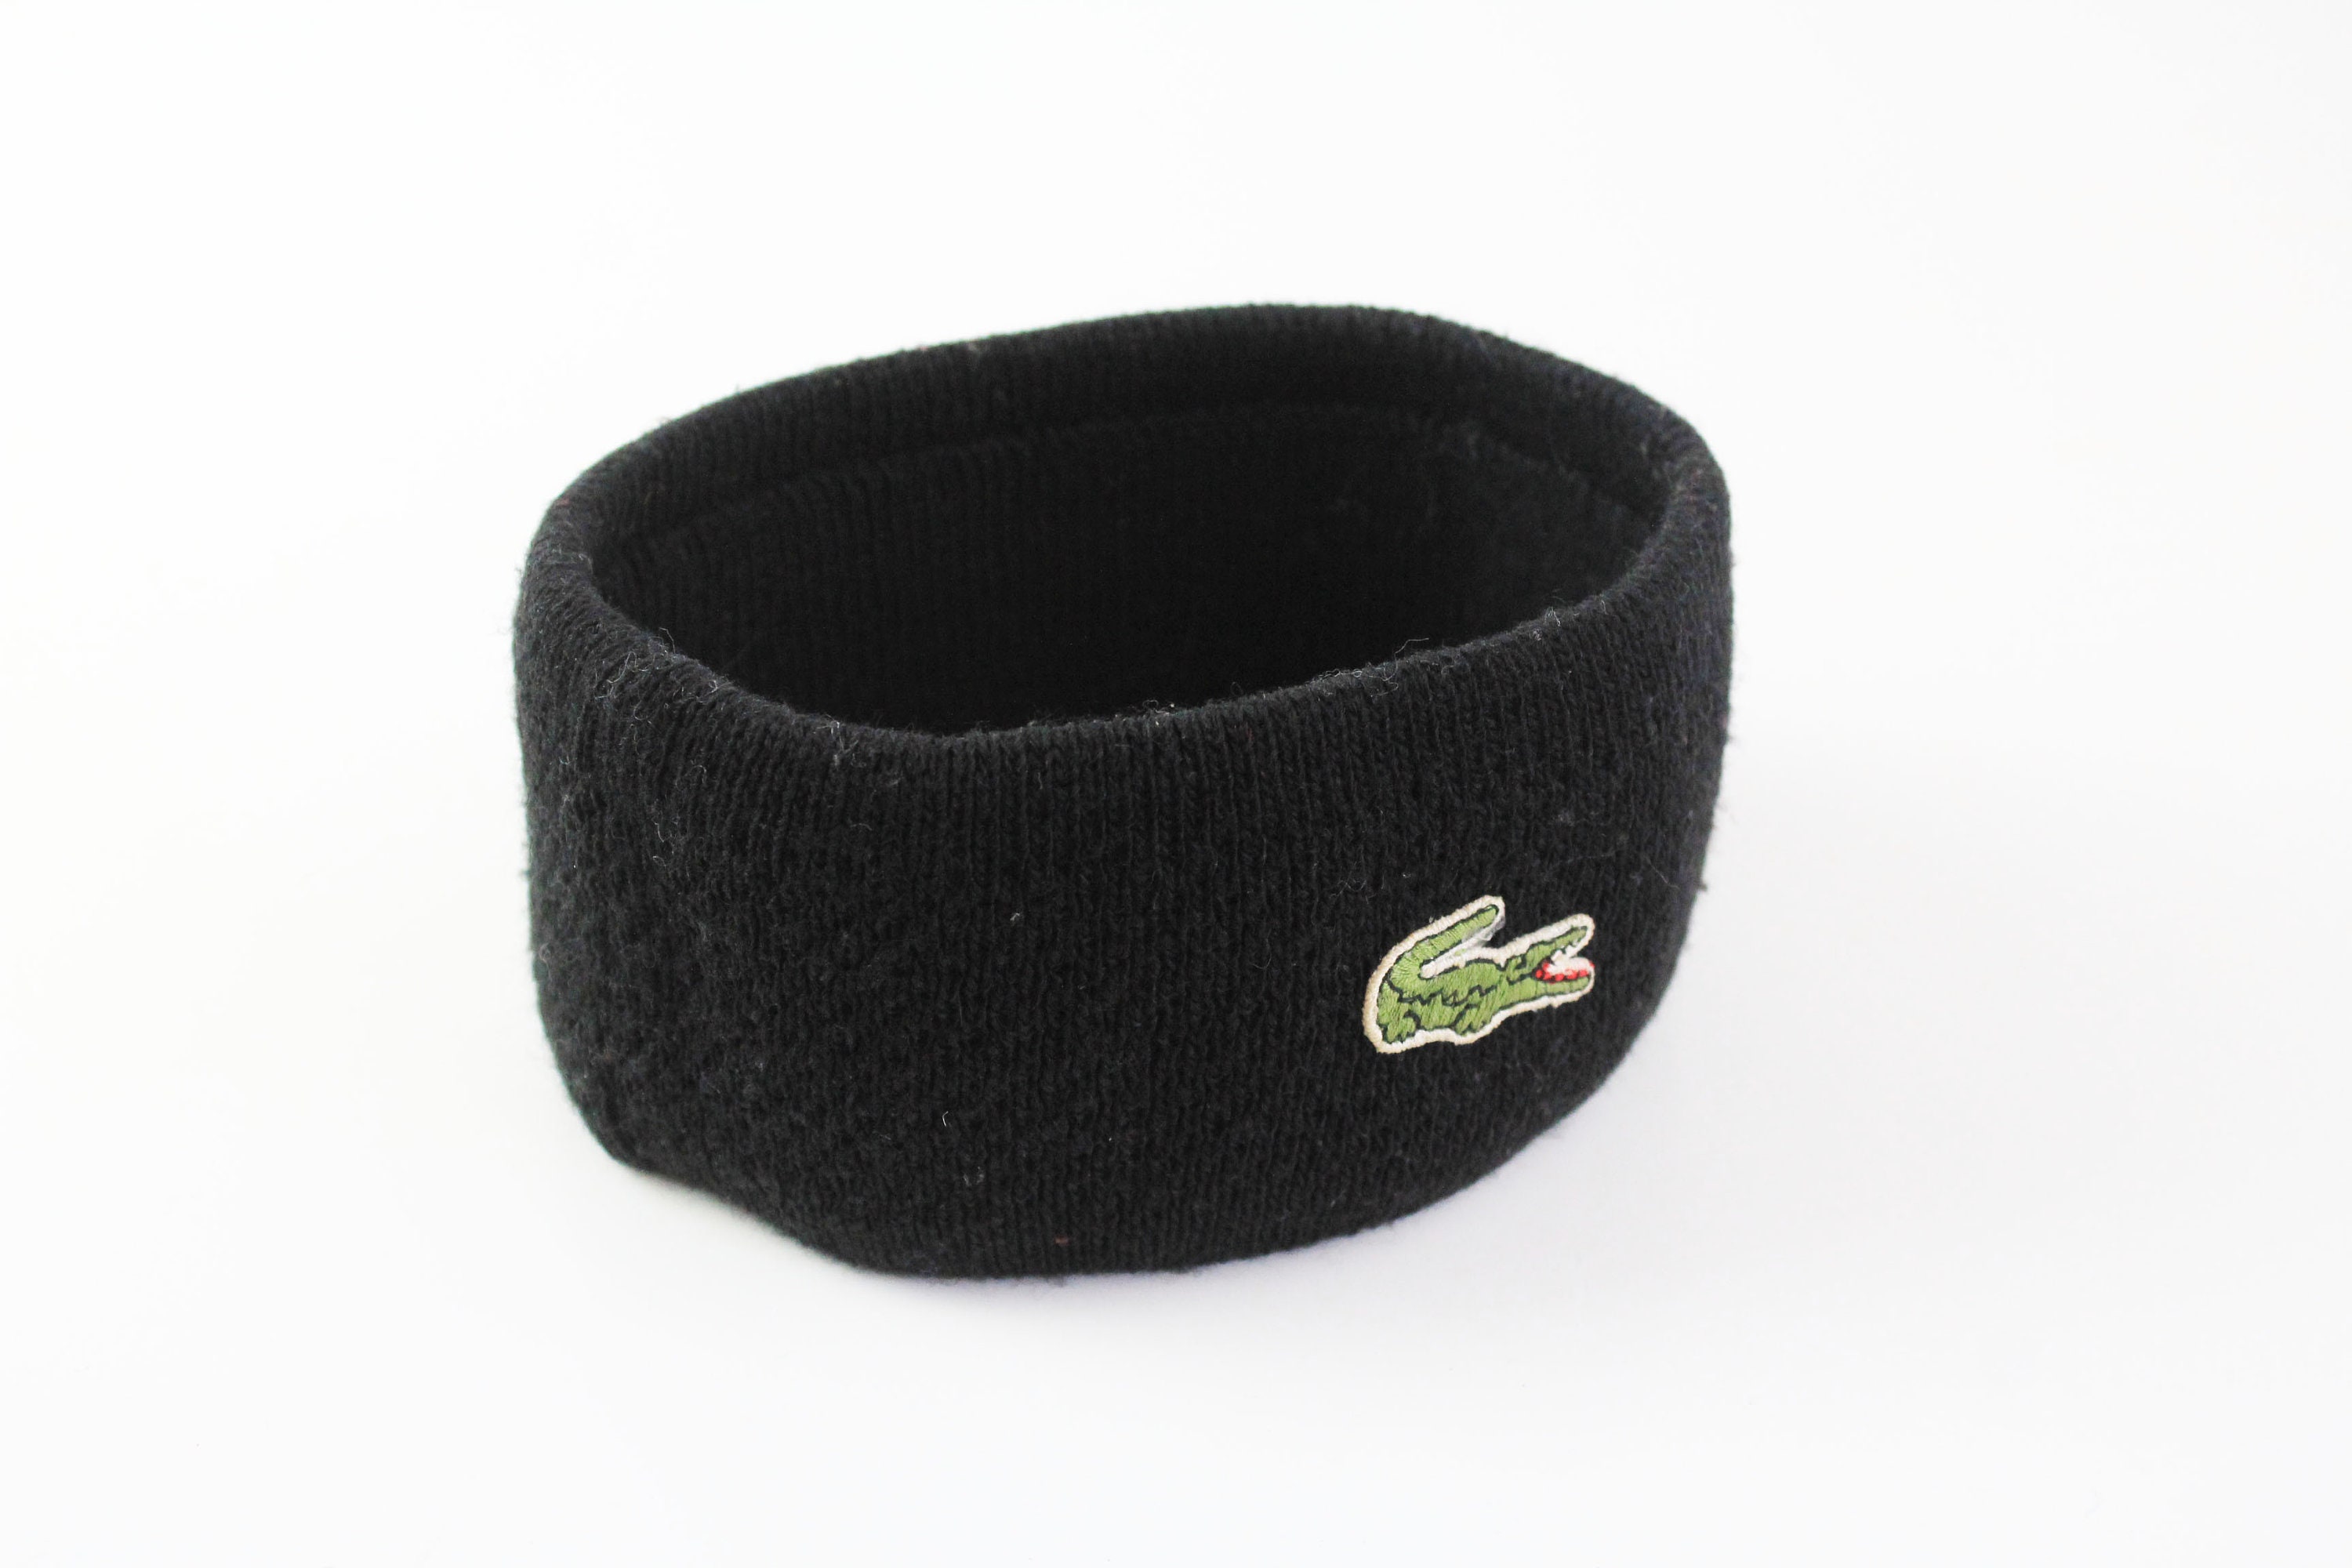 Vintage LACOSTE Wristband Sport Collectable Authentic - Etsy